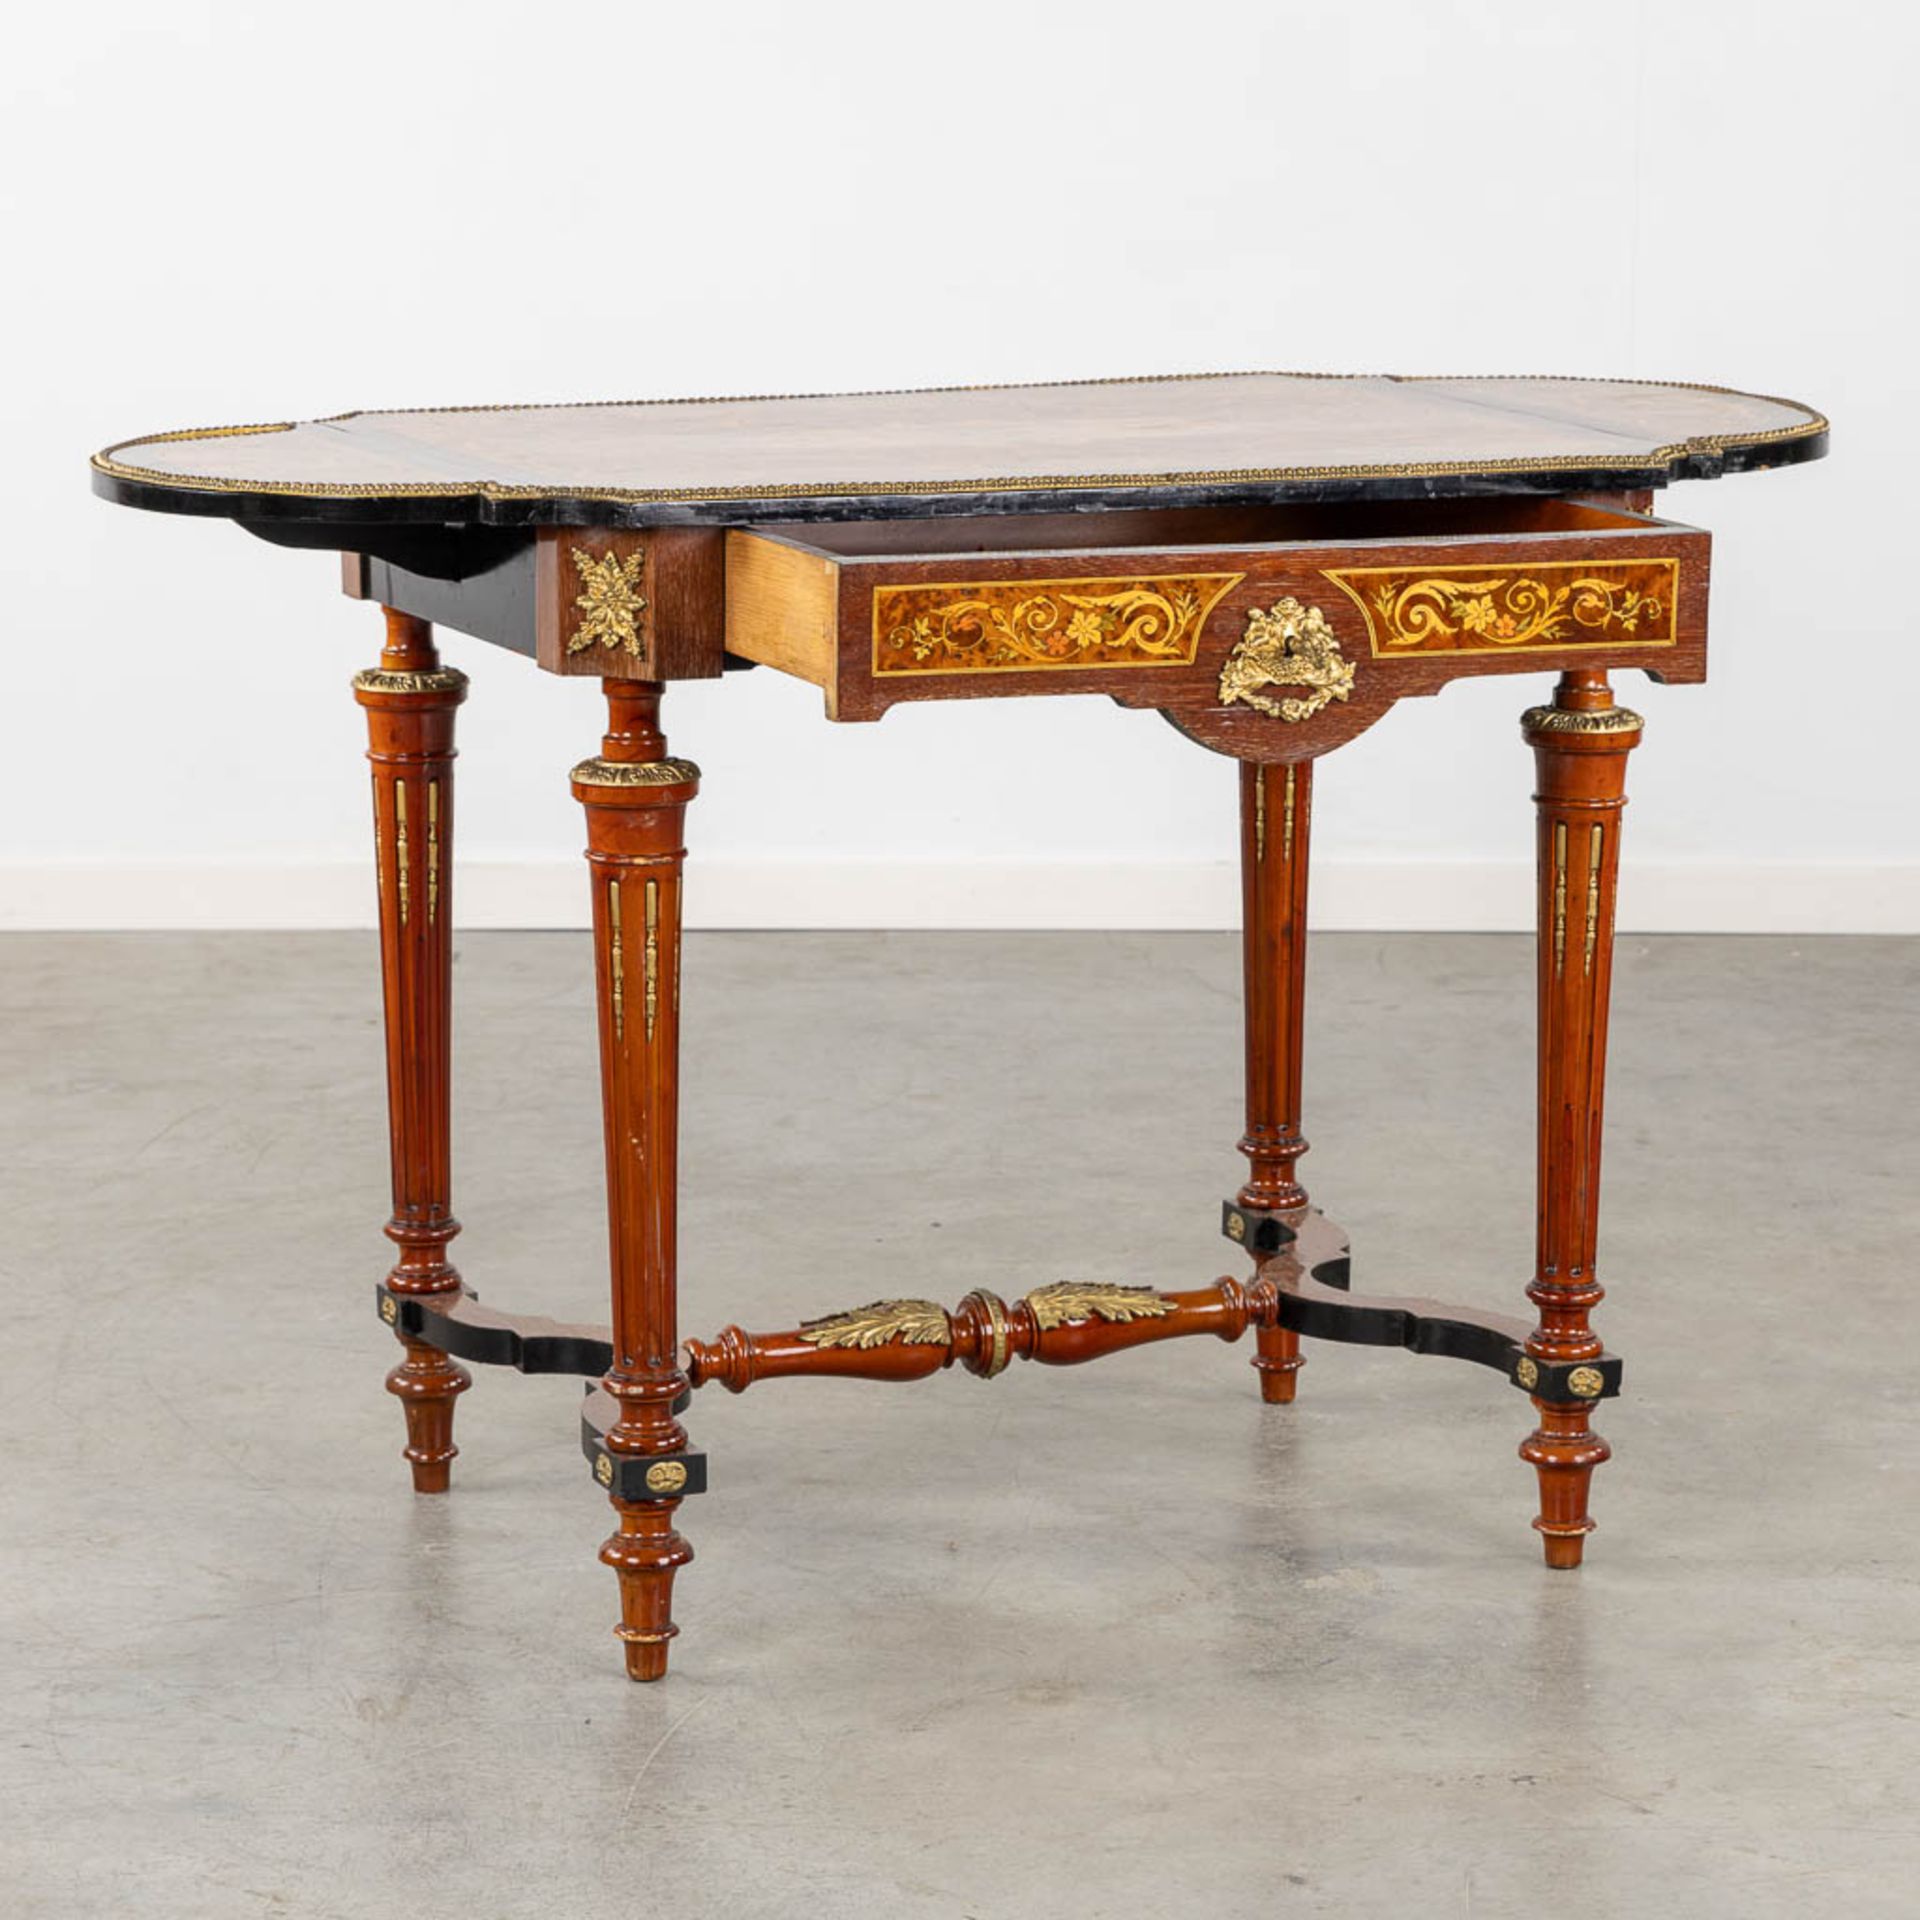 A side table/play table, marquetry inlay and mounted with bronze. 20th C. (L:57 x W:115 x H:74 cm) - Bild 4 aus 19